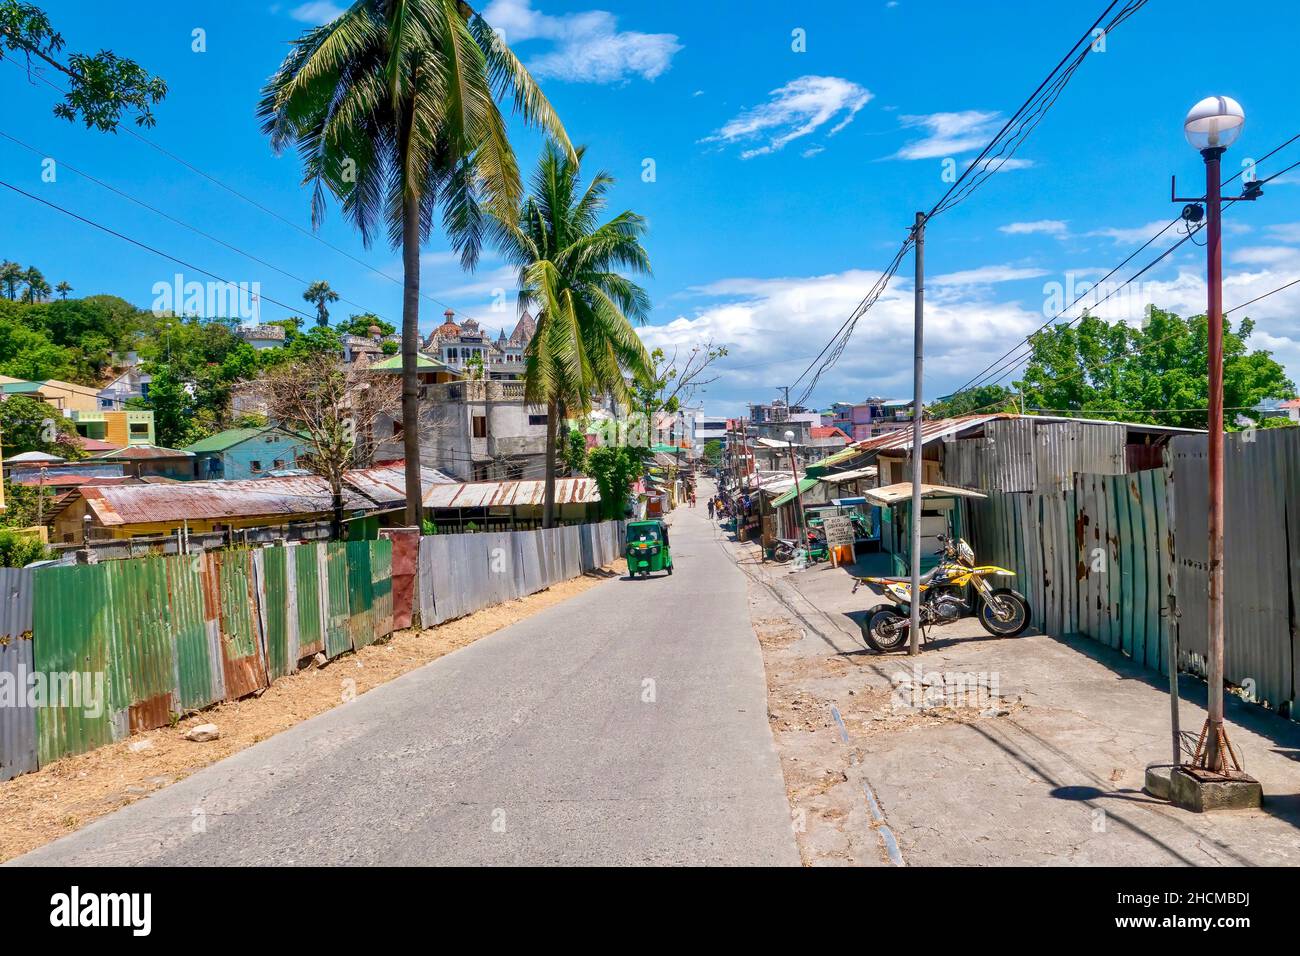 Sabang Village, Puerto Galera, Philippines - May 4, 2021: A narrow road lined with corrugated metal sheeting and simple buildings on the outskirts of Stock Photo